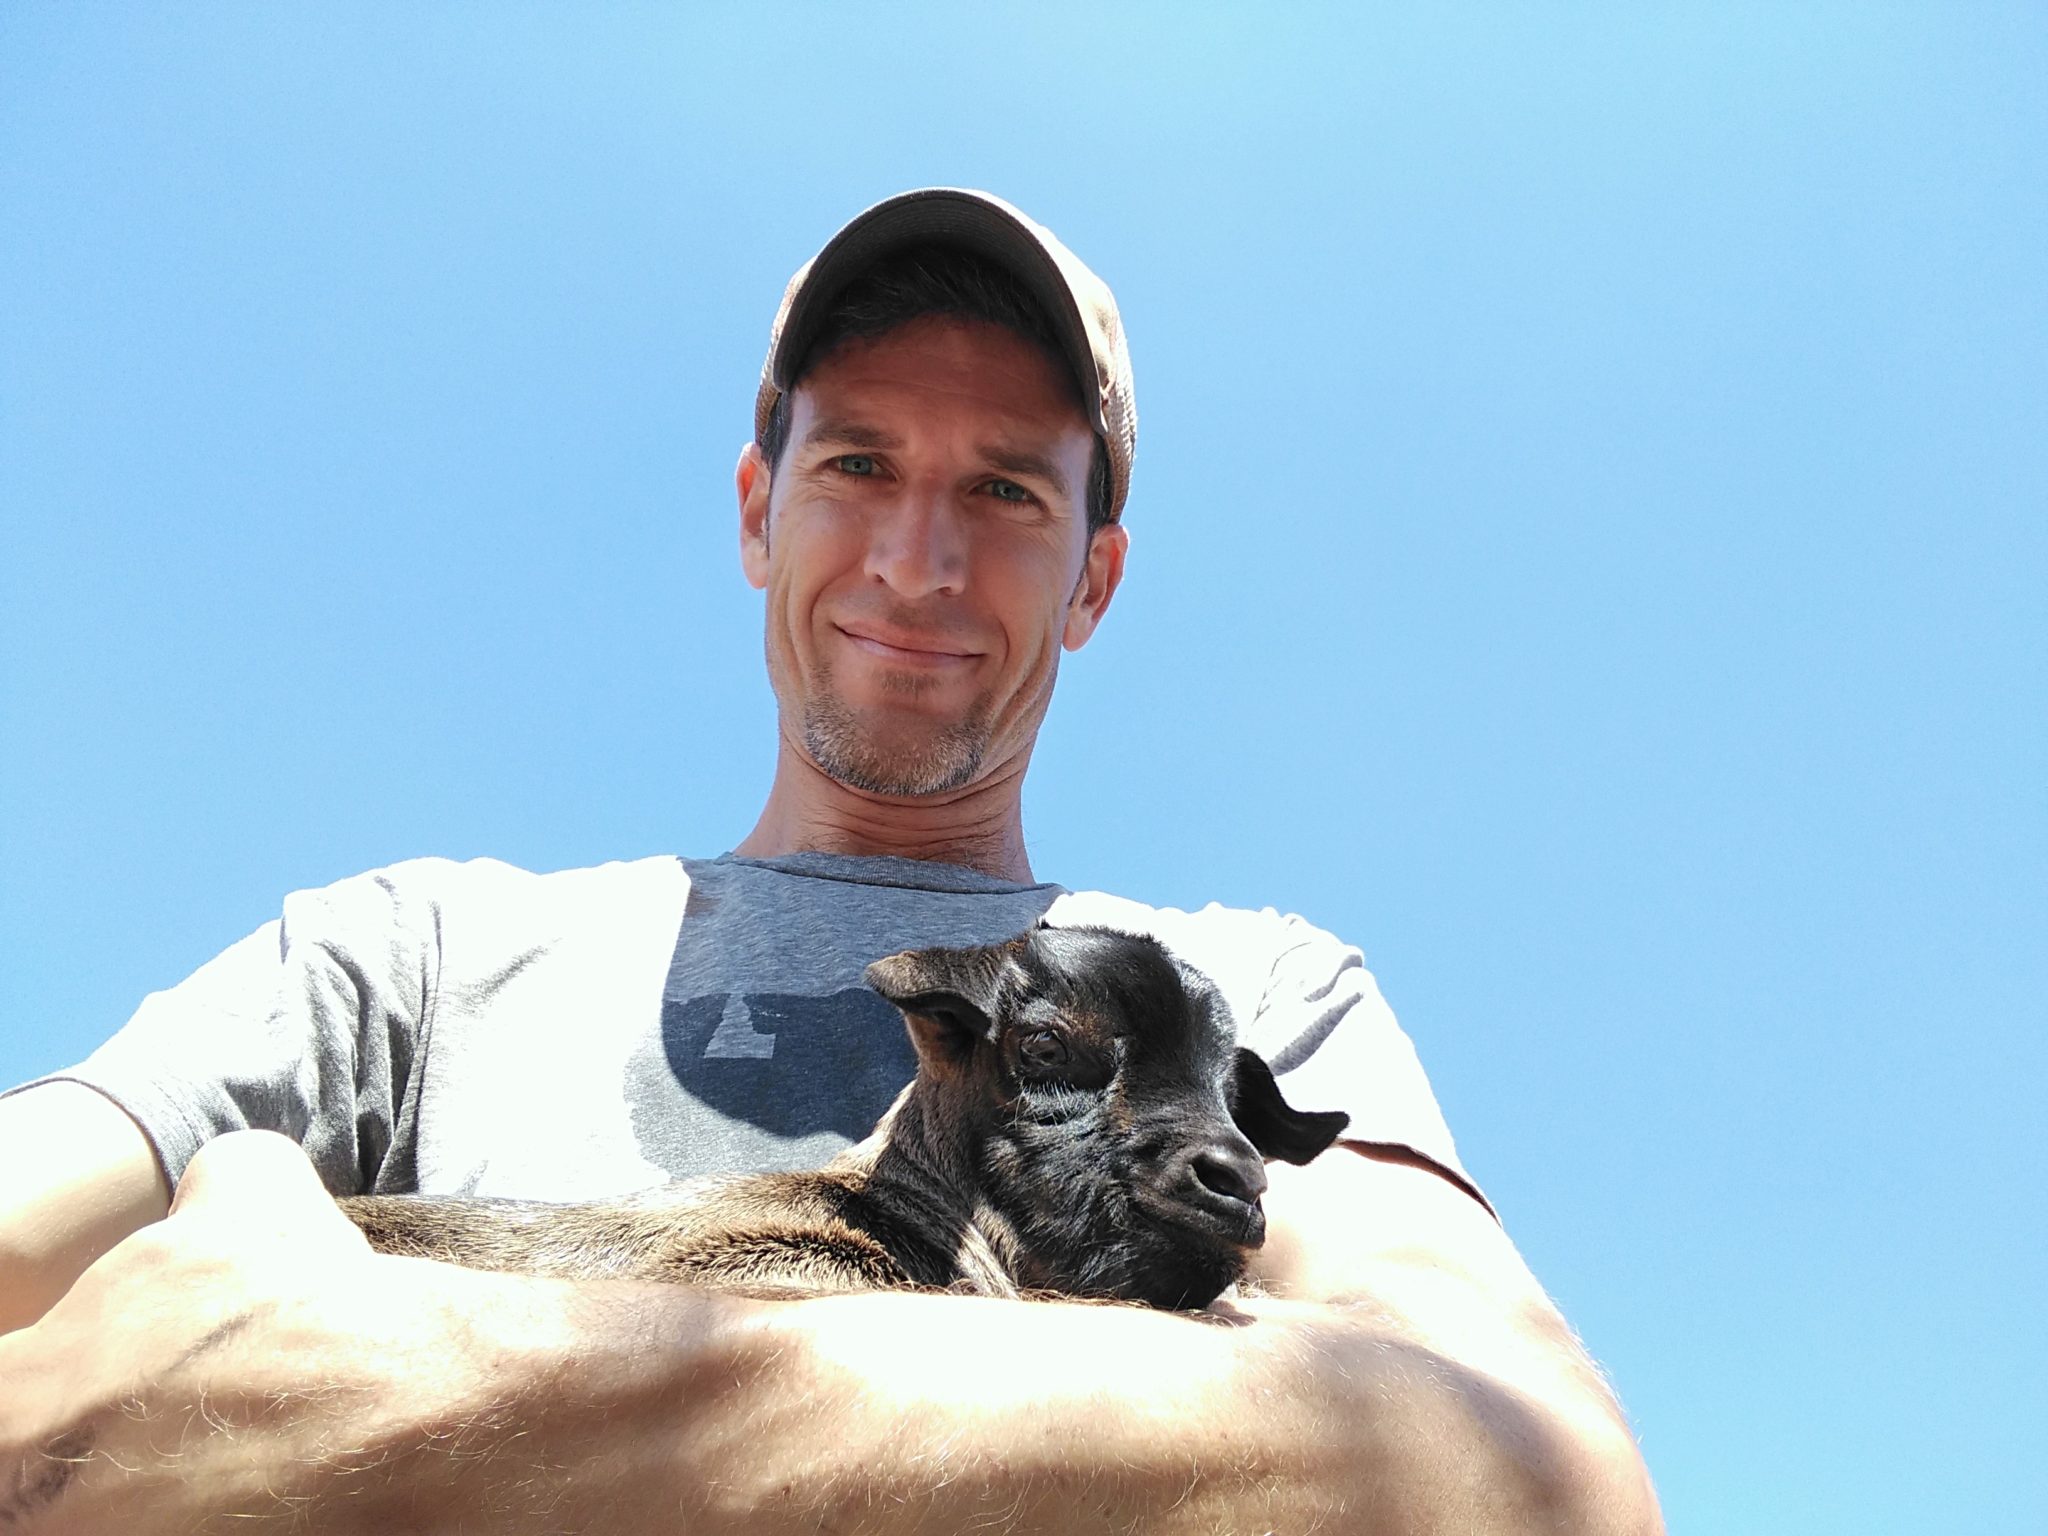 Caucasian man with cap hold a young goat in his arms